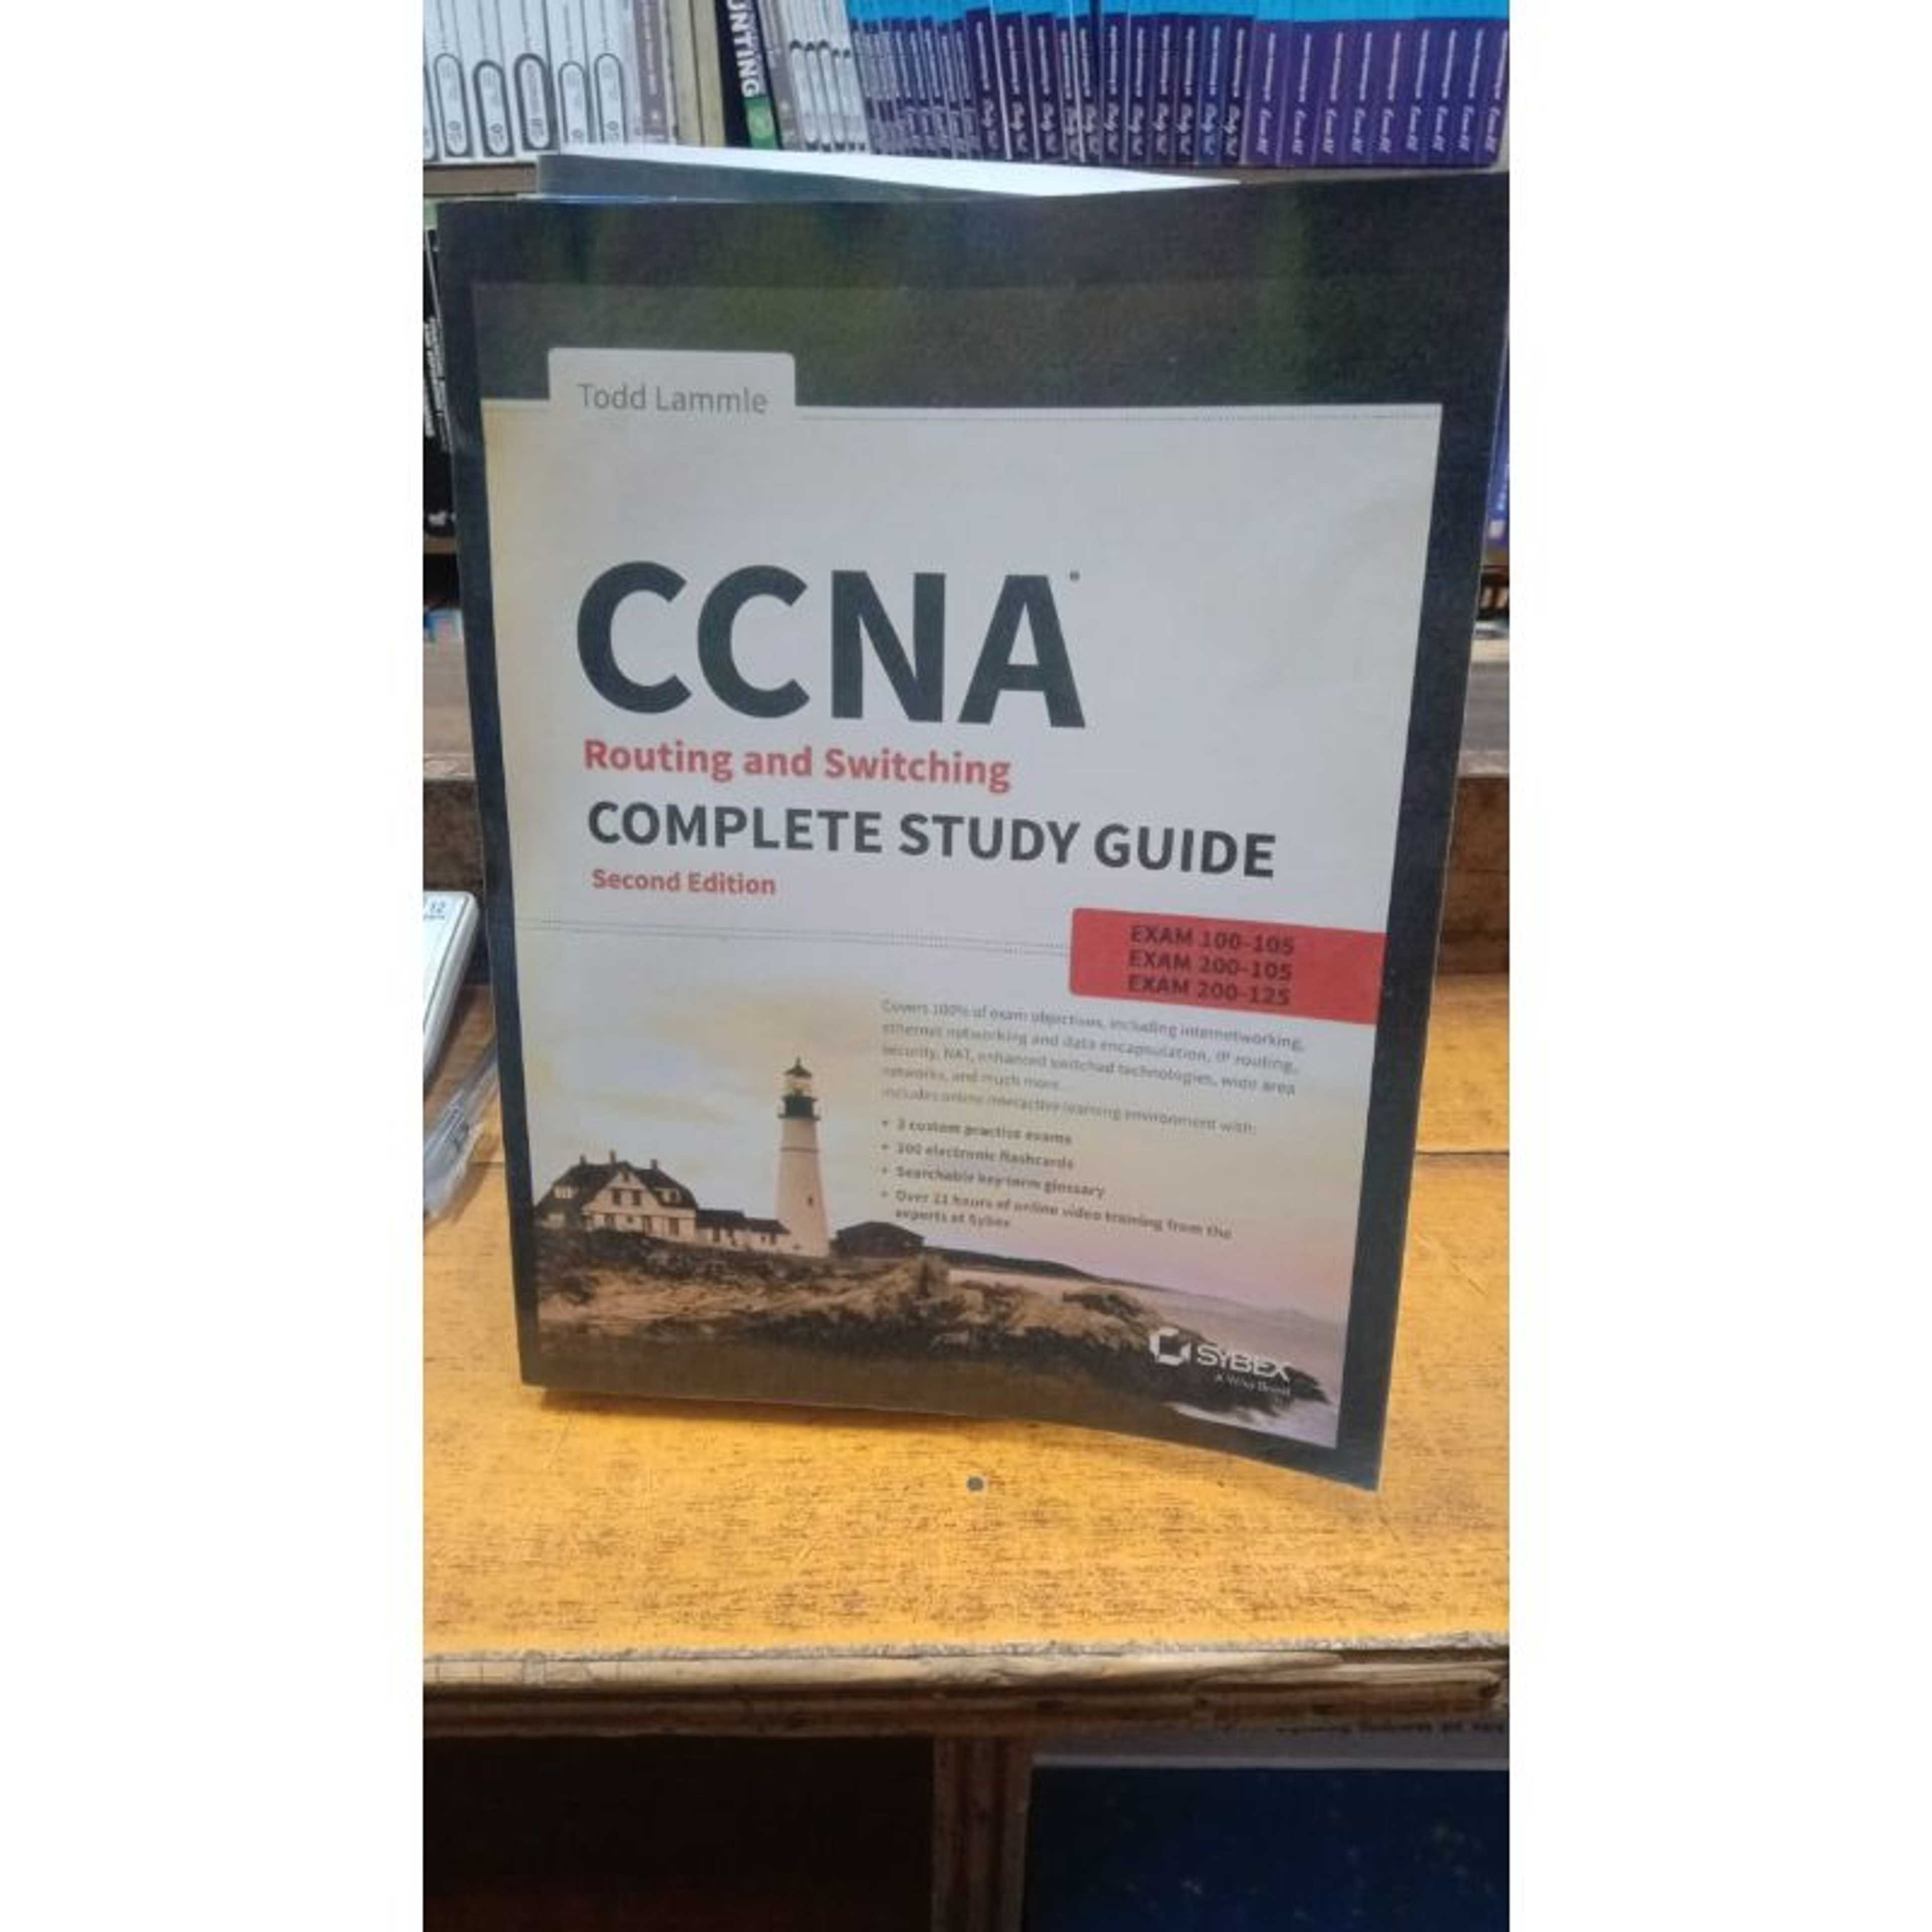 ccna -routing and switching complete study guide second edition